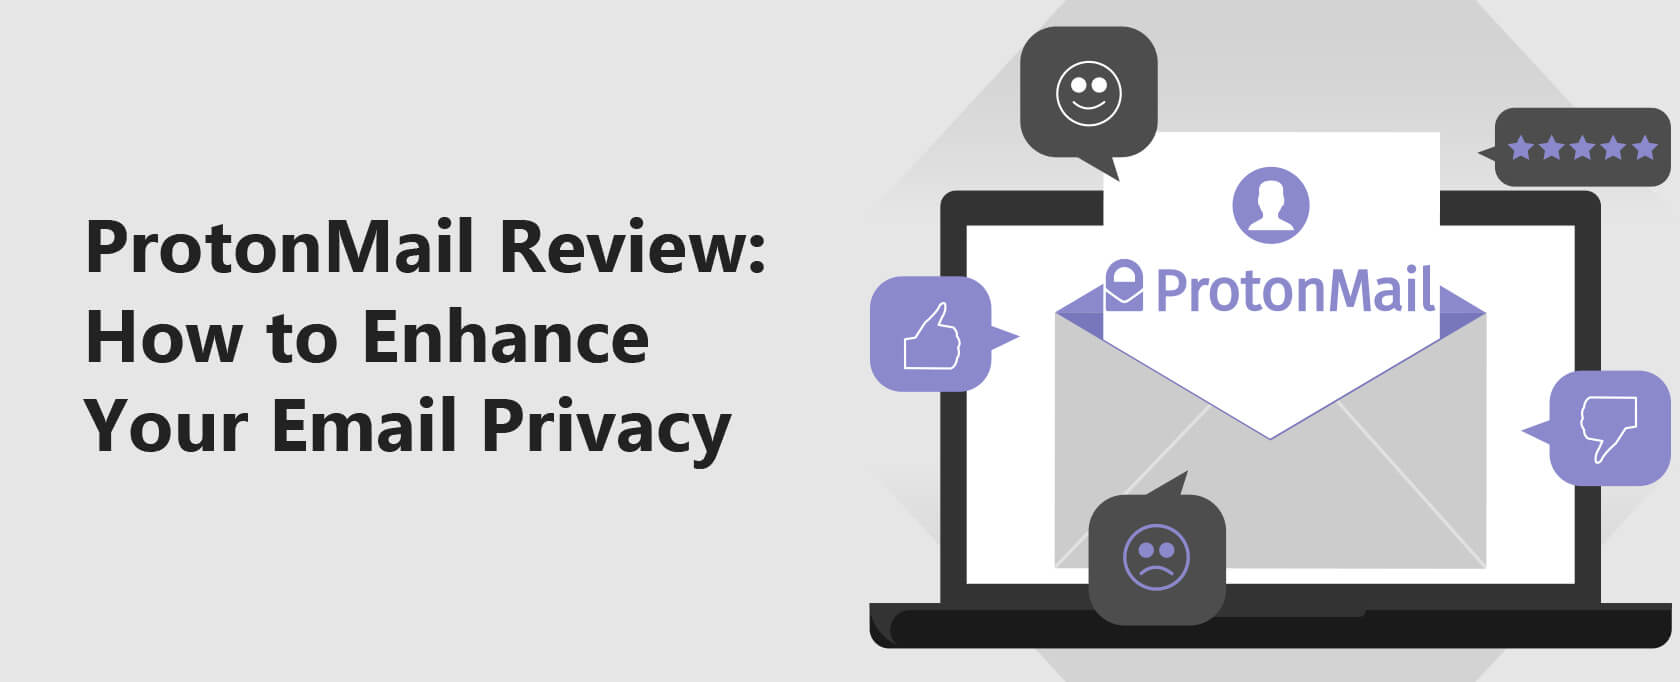 ProtonMail Review: How to Enhance Your Email Privacy